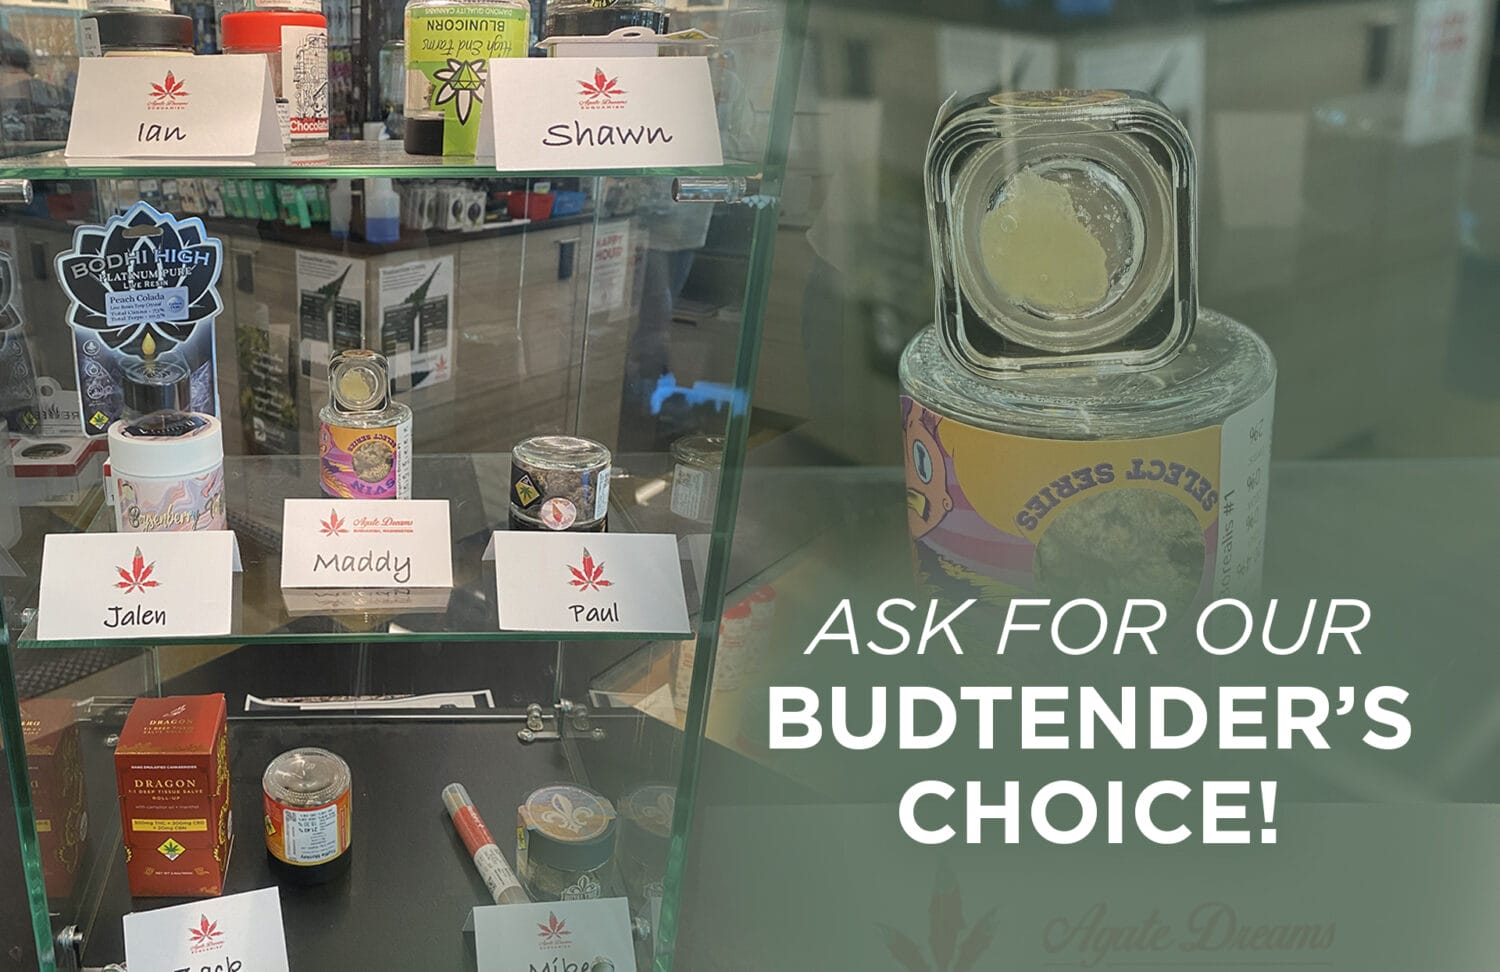 7-24 Budtender's Choice